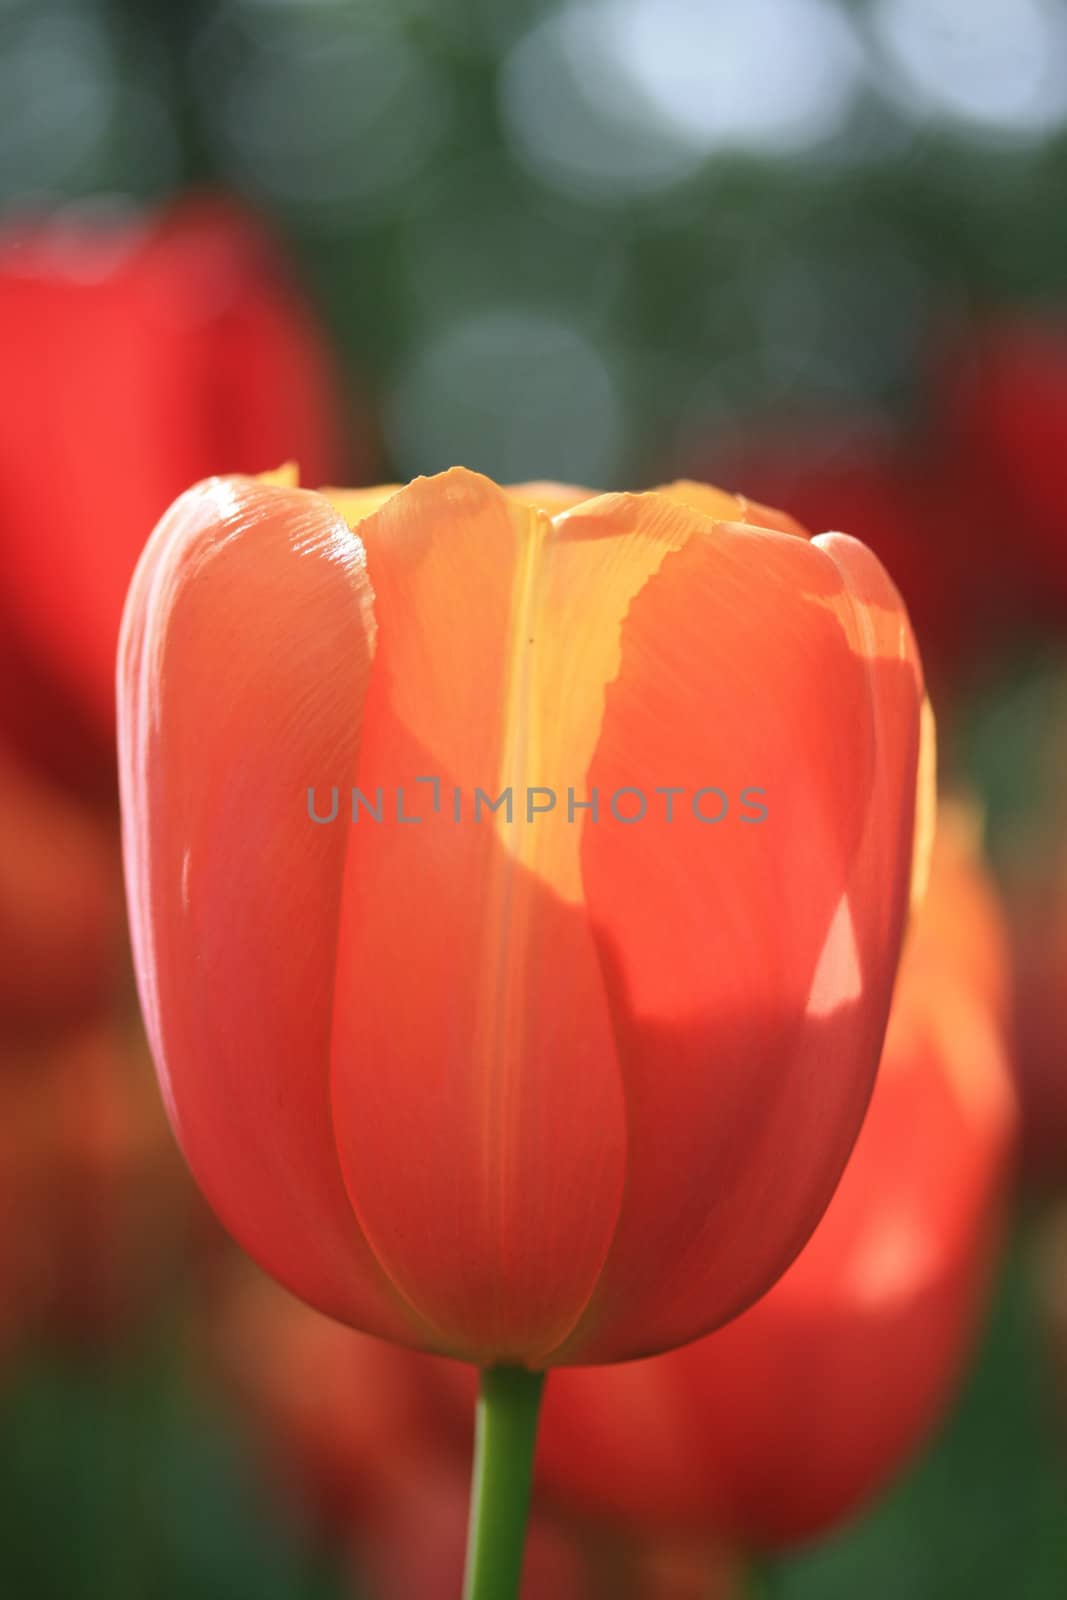 Close up of an orange and yellow tulip by studioportosabbia